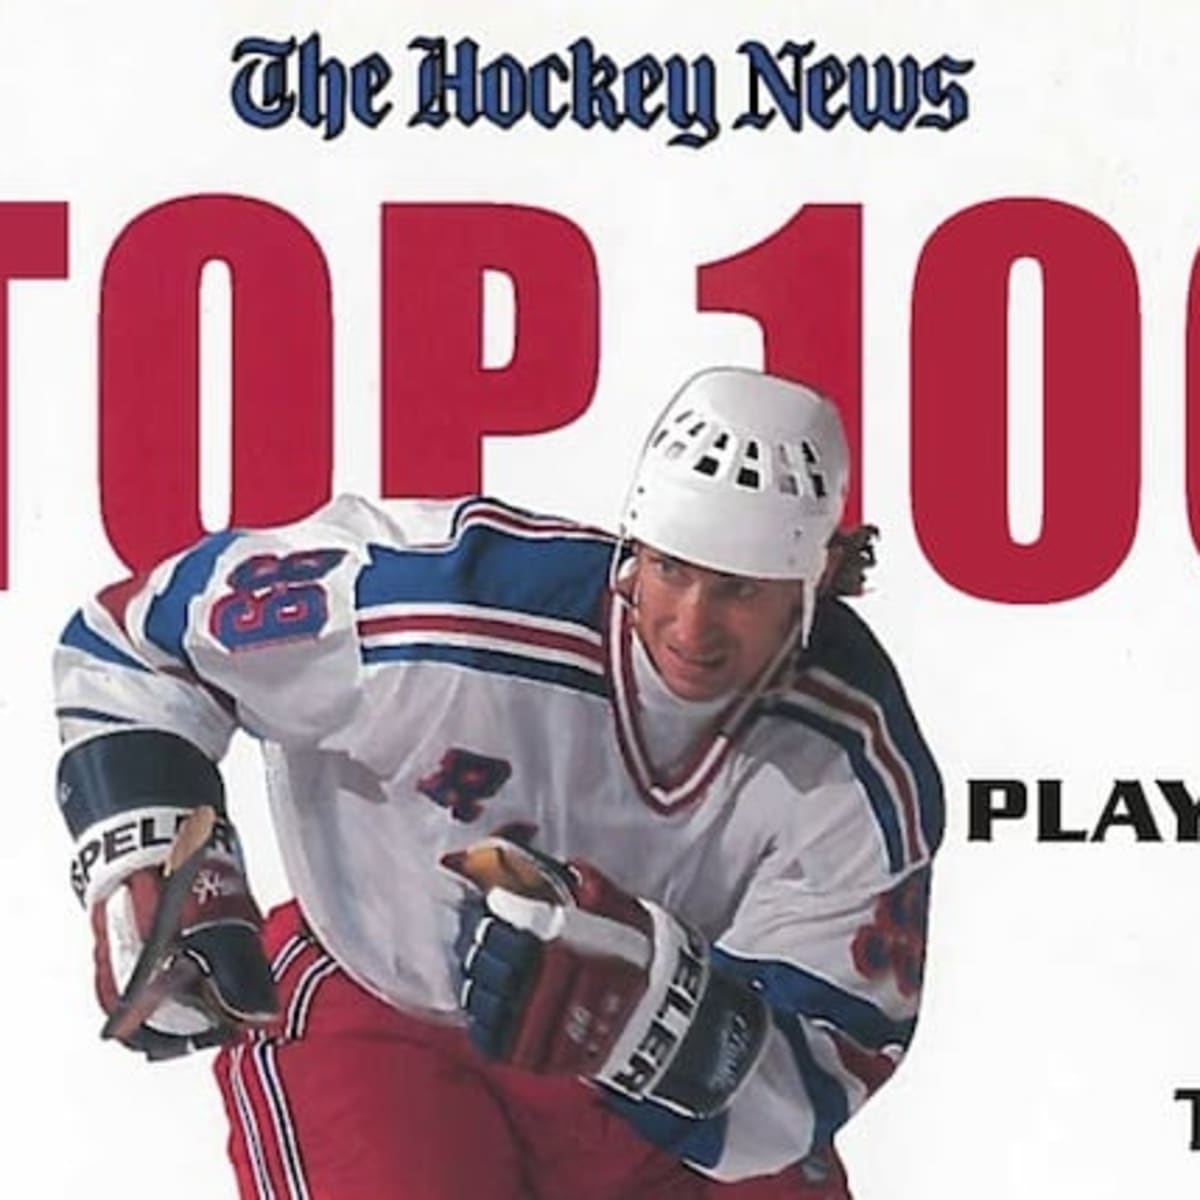 The Top 100 NHL of all-time, throwback style - Hockey News